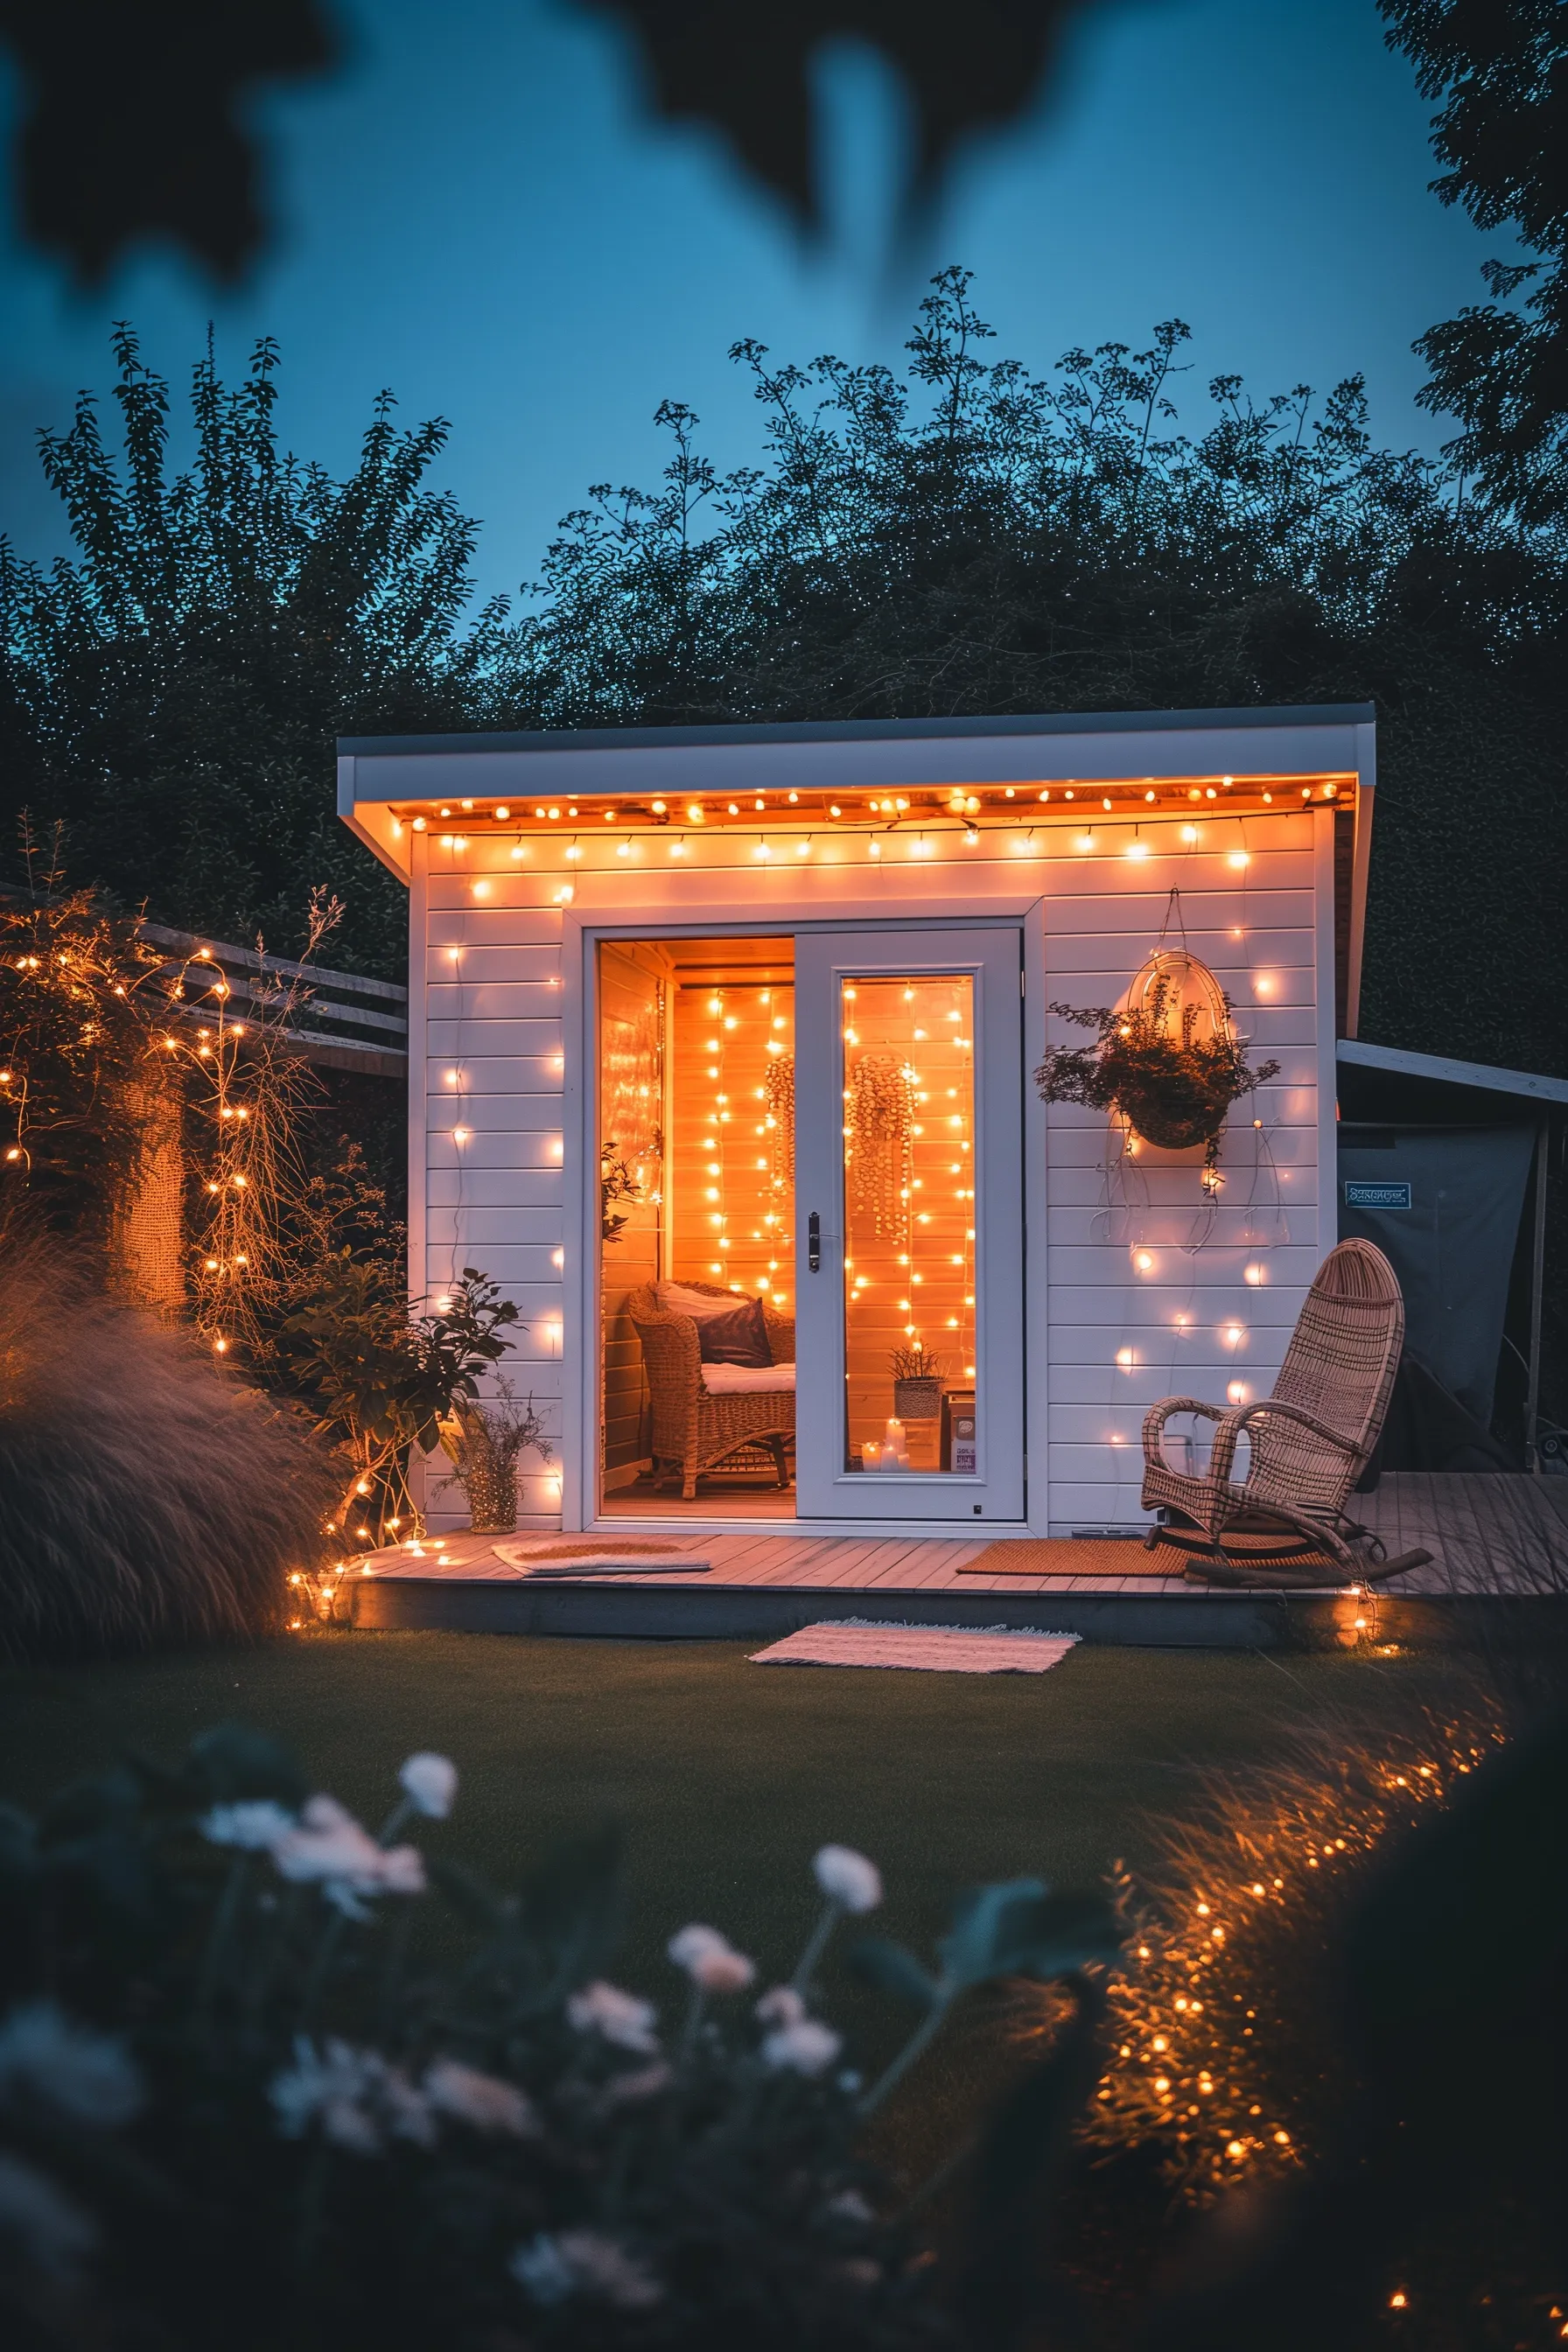 a man cave shed with some greenery and plants and fairylights